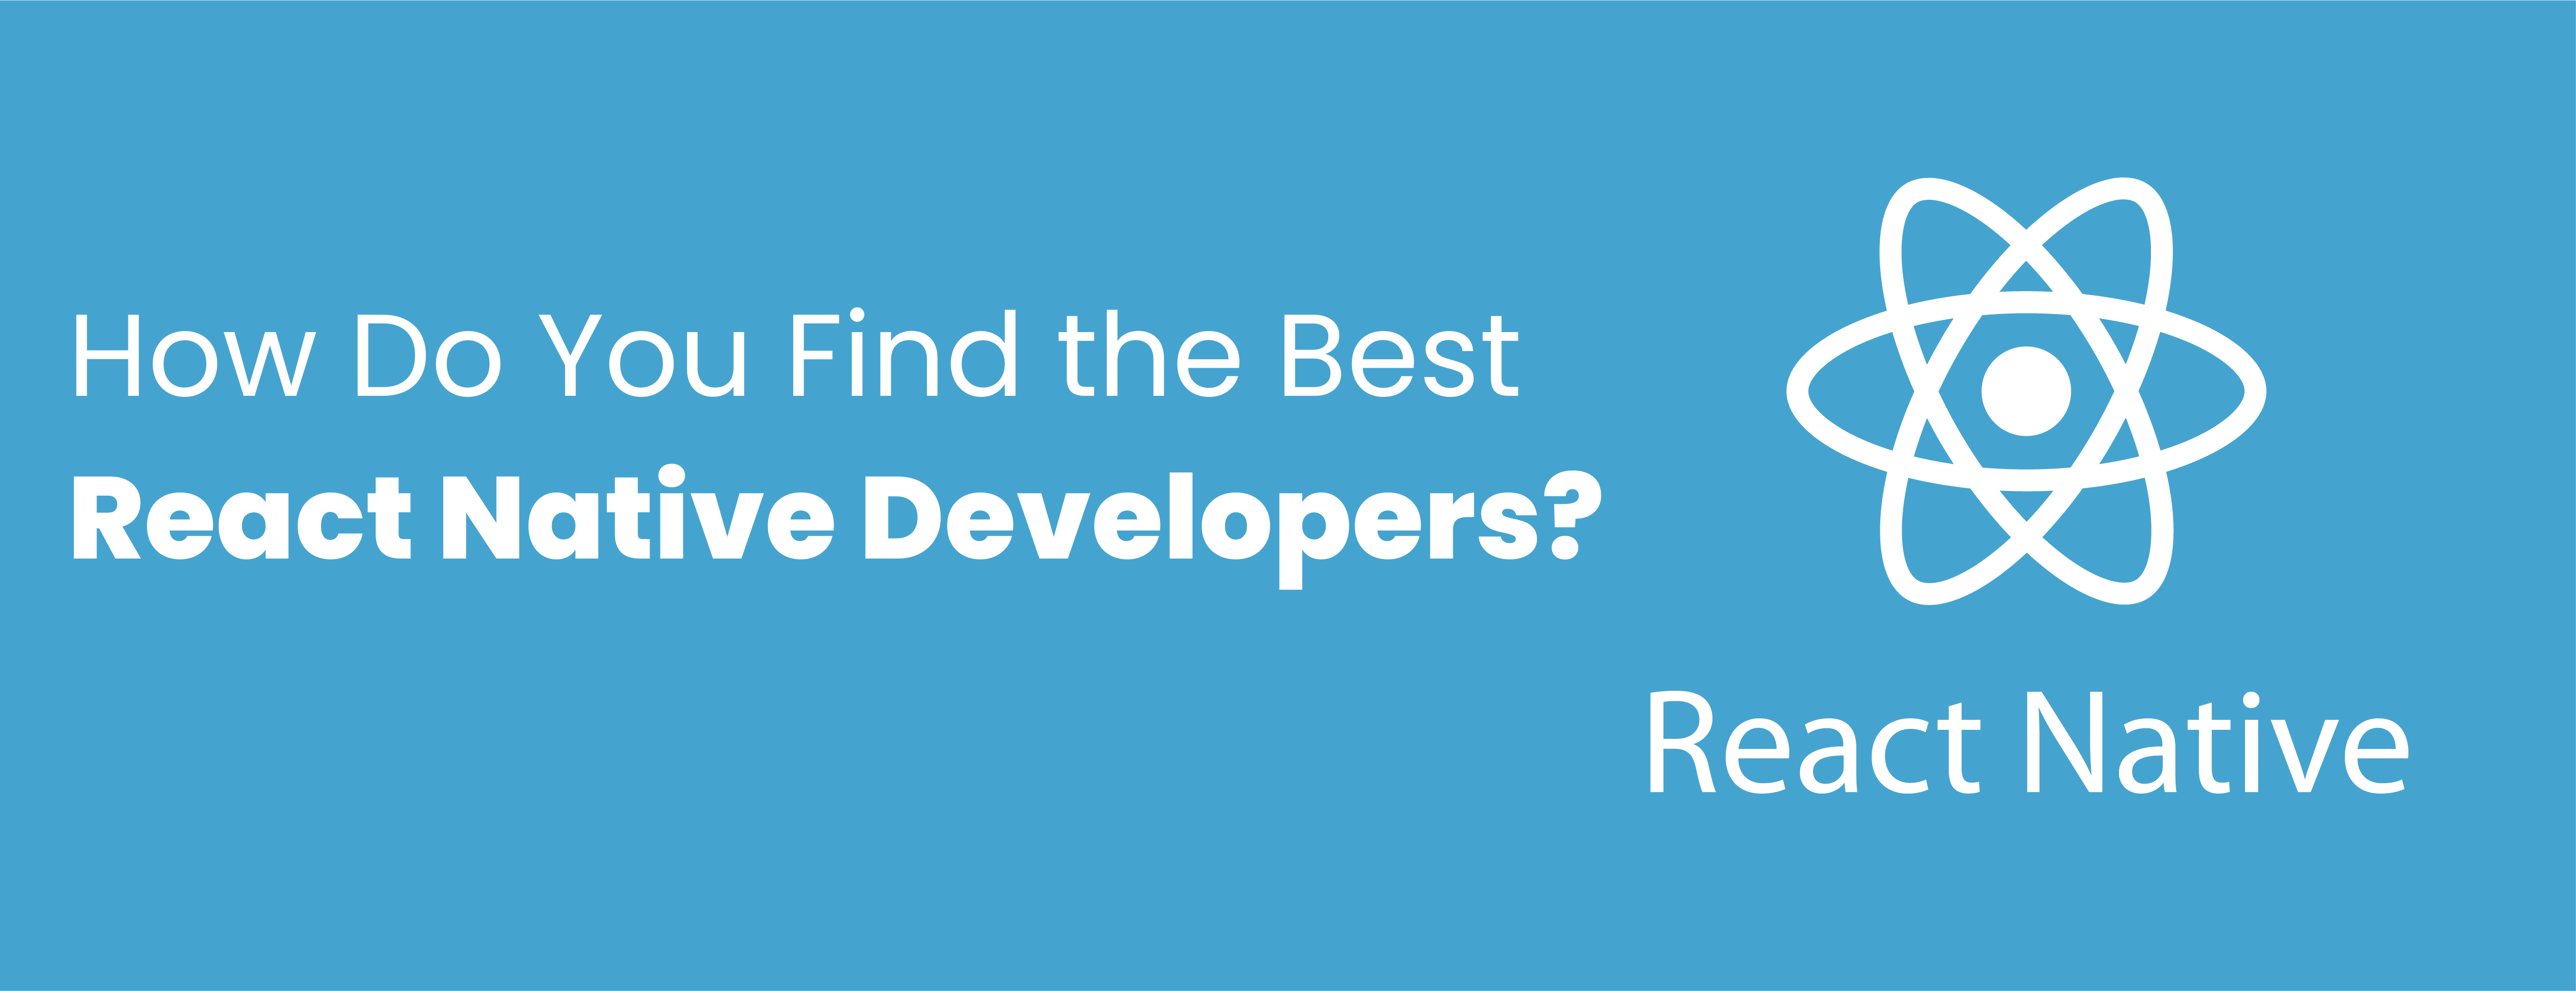 How Do You Find the Best React Native Developers? | WriteDig